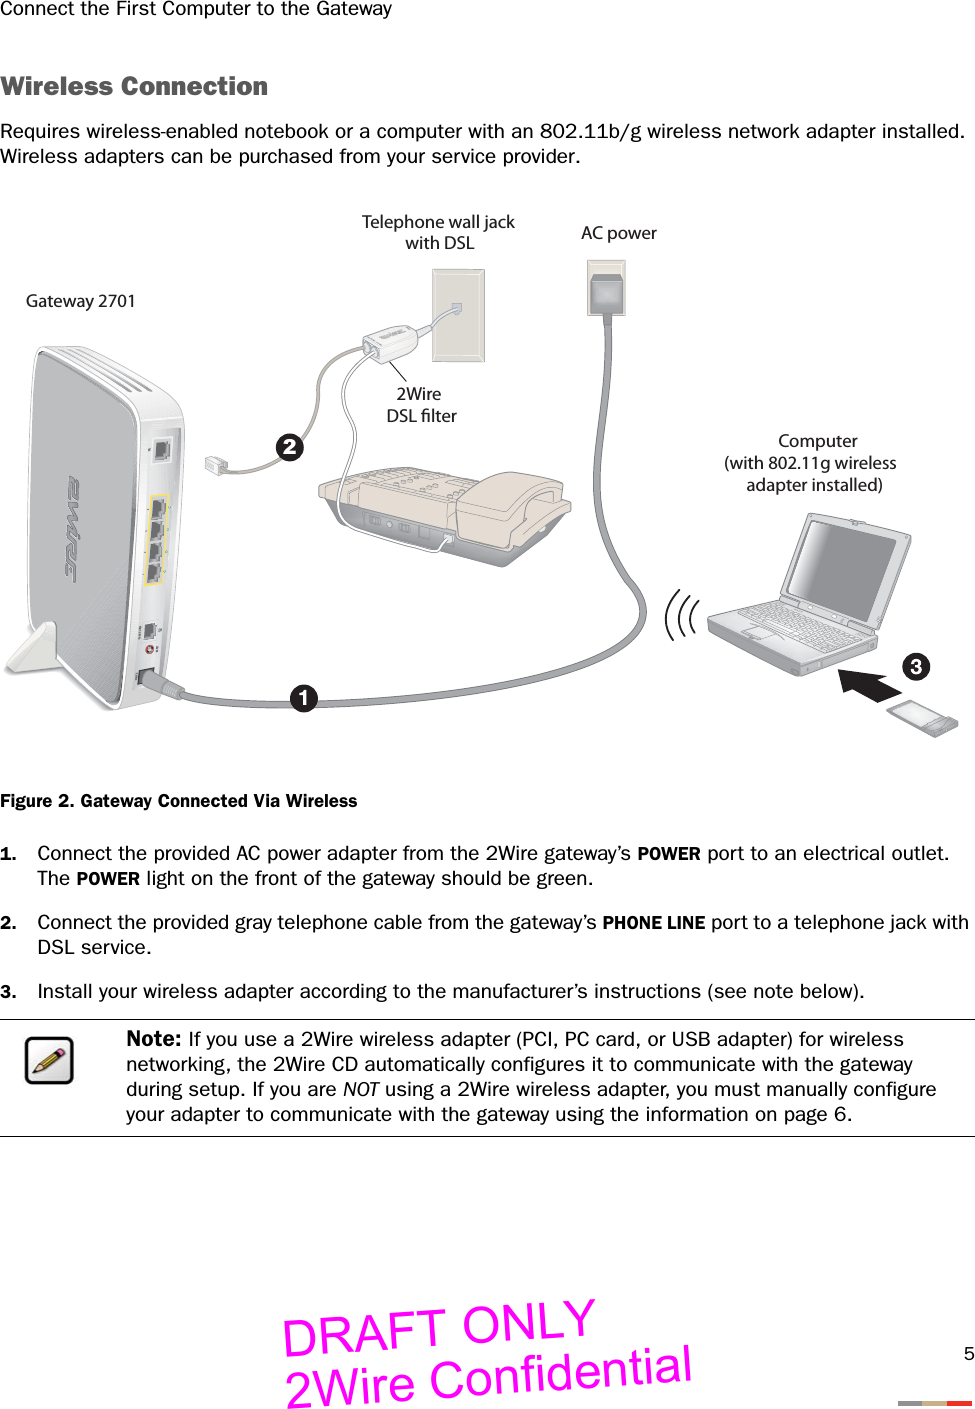 Connect the First Computer to the Gateway5Wireless ConnectionRequires wireless-enabled notebook or a computer with an 802.11b/g wireless network adapter installed. Wireless adapters can be purchased from your service provider.Figure 2. Gateway Connected Via Wireless1. Connect the provided AC power adapter from the 2Wire gateway’s POWER port to an electrical outlet. The POWER light on the front of the gateway should be green.2. Connect the provided gray telephone cable from the gateway’s PHONE LINE port to a telephone jack with DSL service.3. Install your wireless adapter according to the manufacturer’s instructions (see note below).Note: If you use a 2Wire wireless adapter (PCI, PC card, or USB adapter) for wireless networking, the 2Wire CD automatically configures it to communicate with the gateway during setup. If you are NOT using a 2Wire wireless adapter, you must manually configure your adapter to communicate with the gateway using the information on page 6.DSLPHONE LINESPOWERRESET2AC power2Wire DSL lterTelephone wall jackwith DSLComputer(with 802.11g wirelessadapter installed)Gateway 2701DRAFT ONLY2Wire Confidential